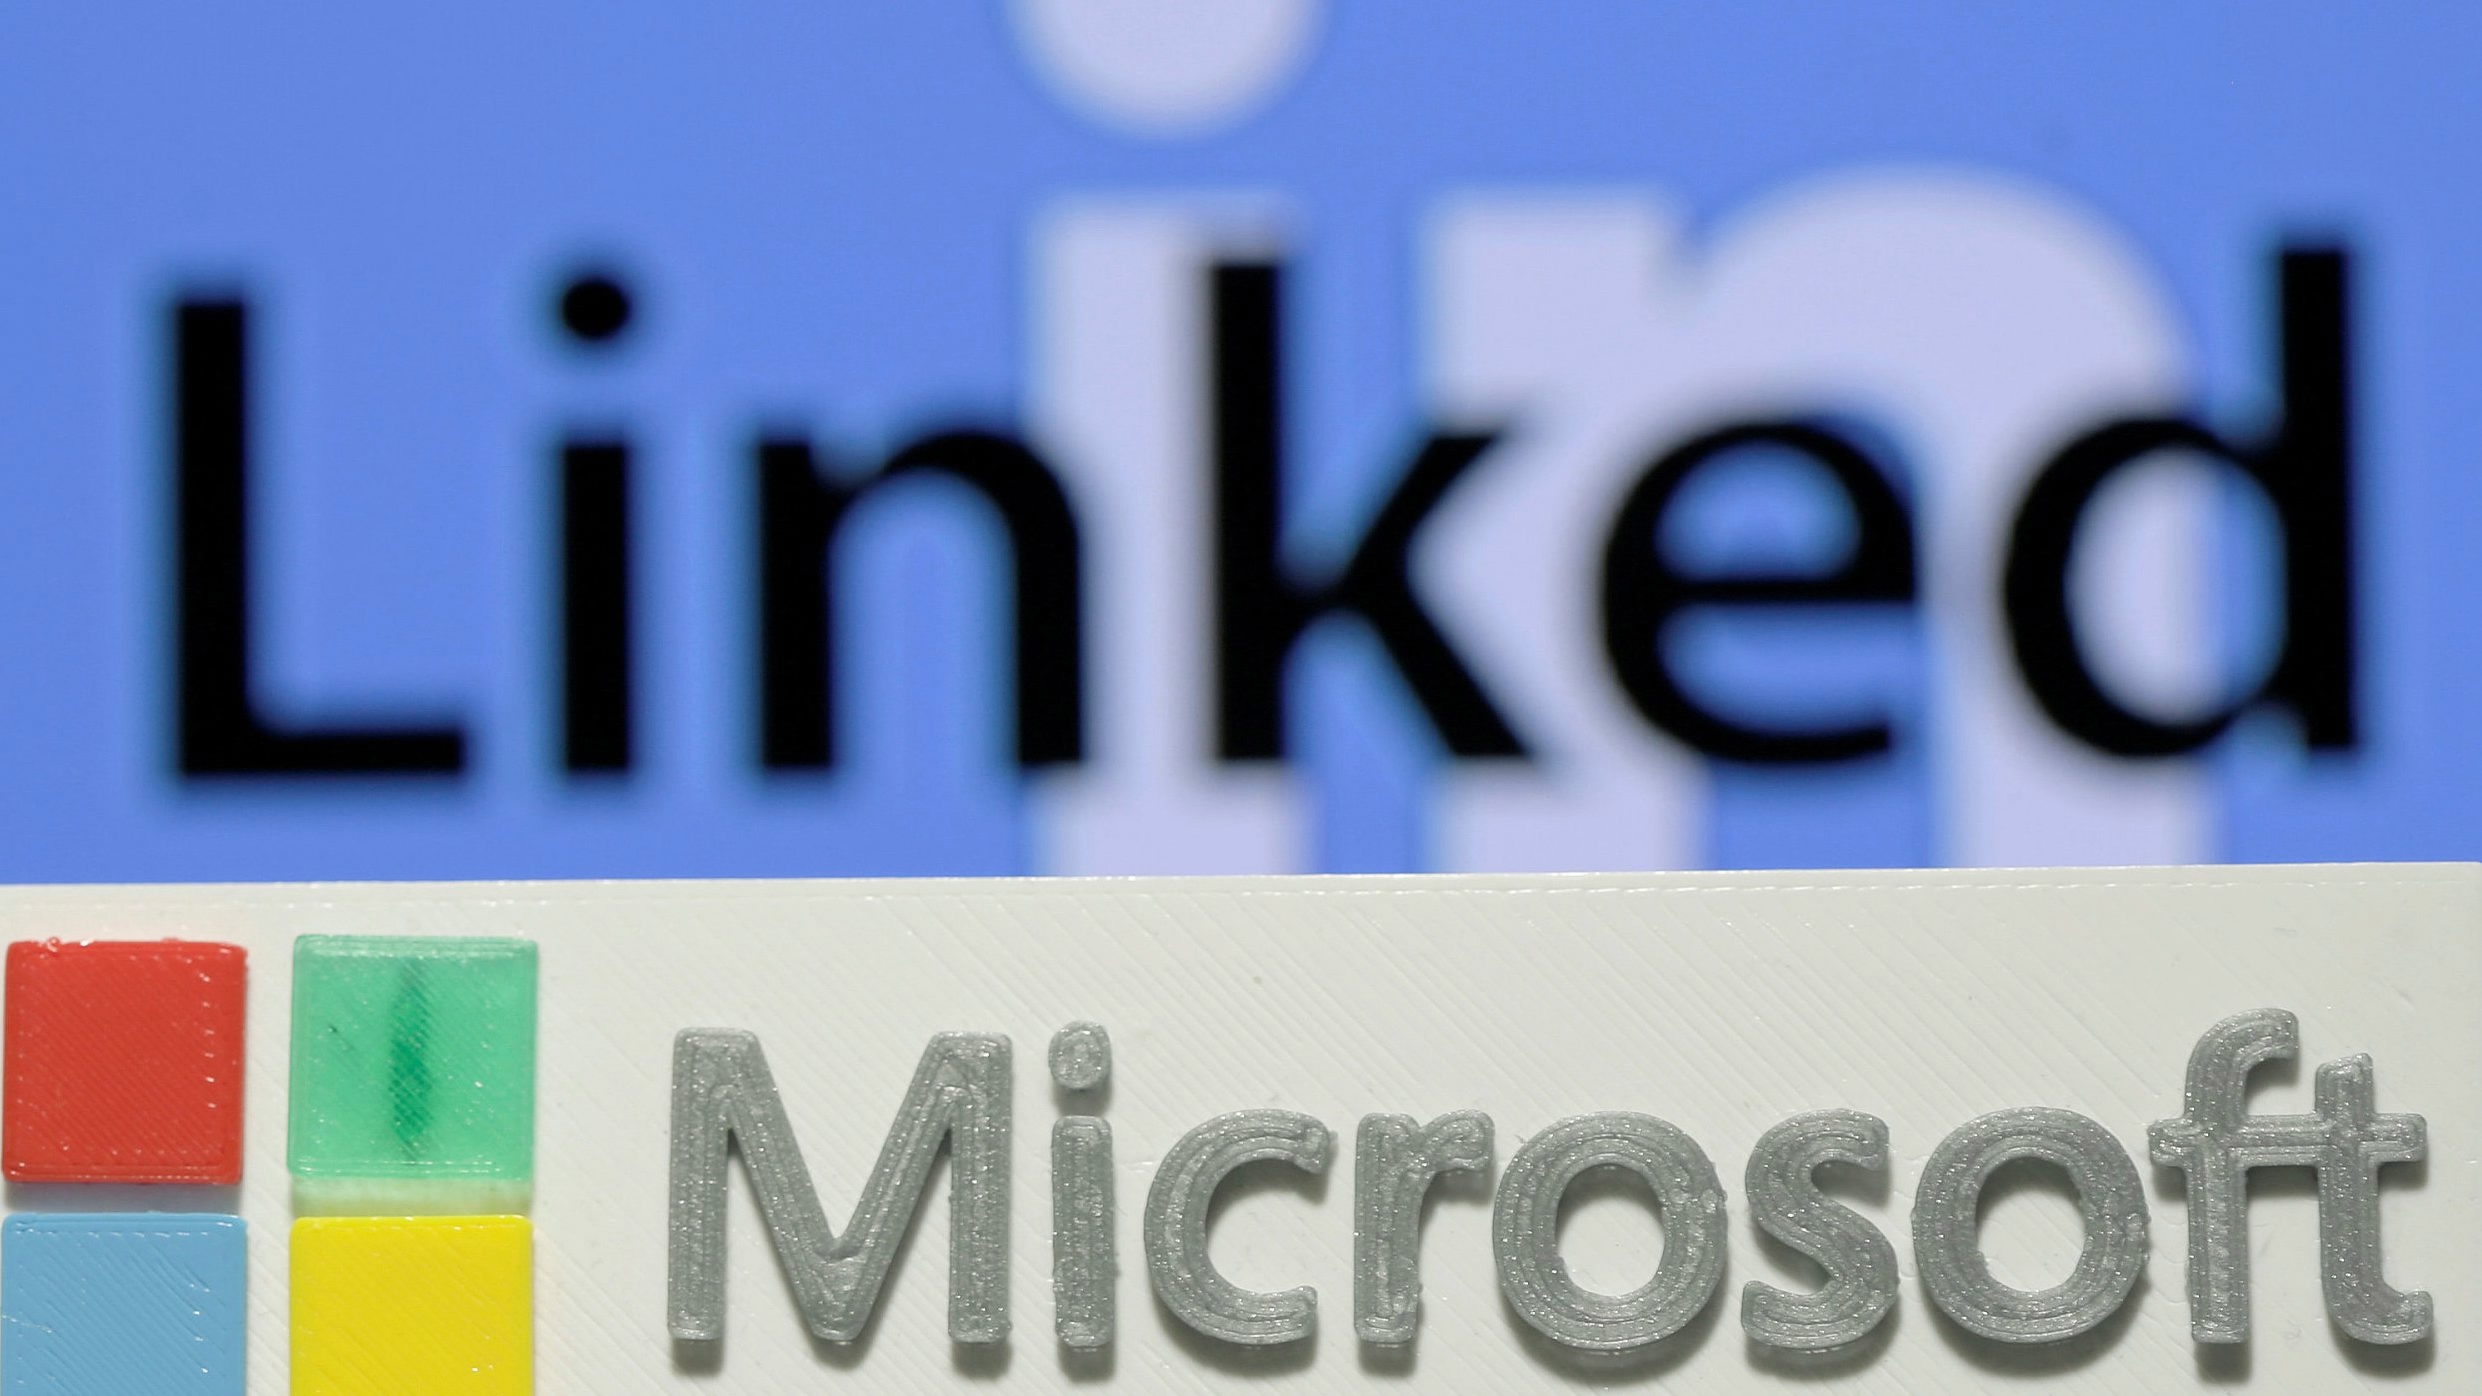 LinkedIn networks a space between China's online businesses